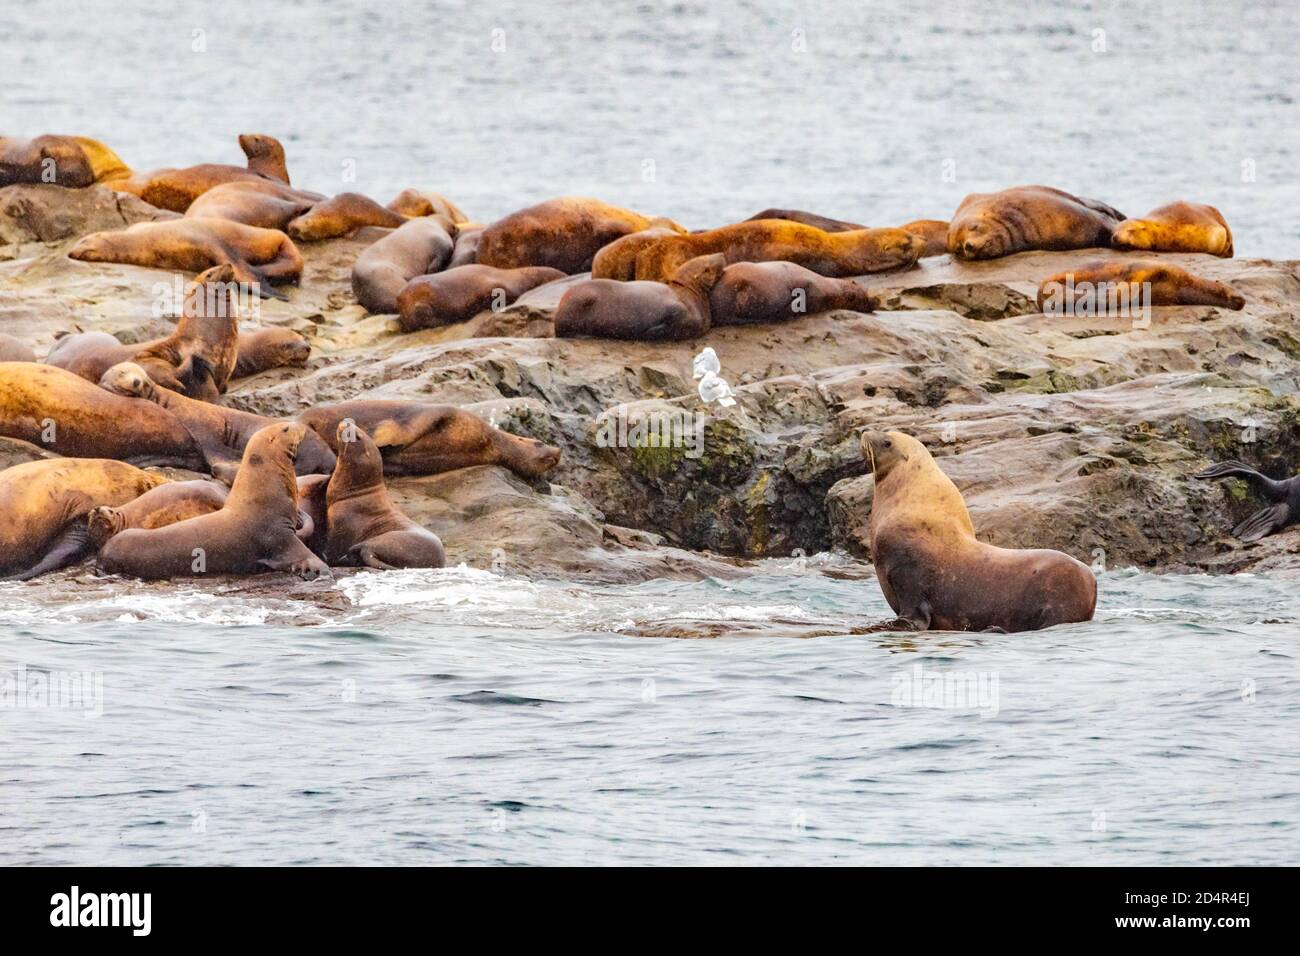 Steller sea lions from gulf of alaska Whittier cruise view Stock Photo